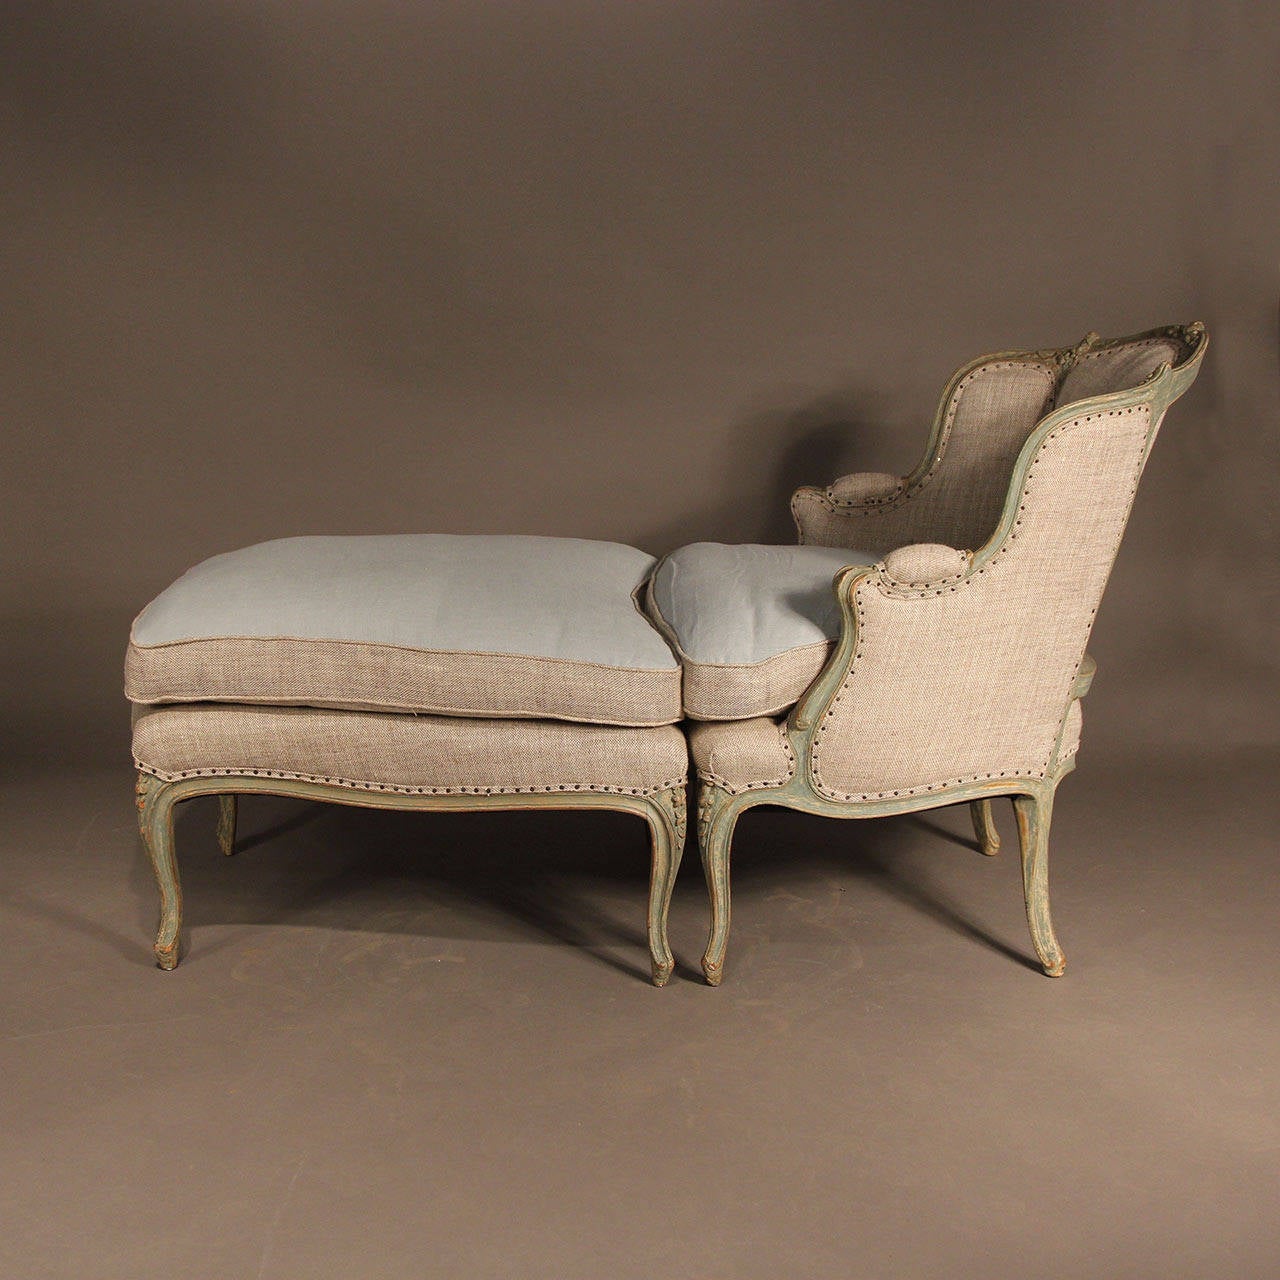 Early 20th Century French Louis XV Style Duchesse Brisee Chaise